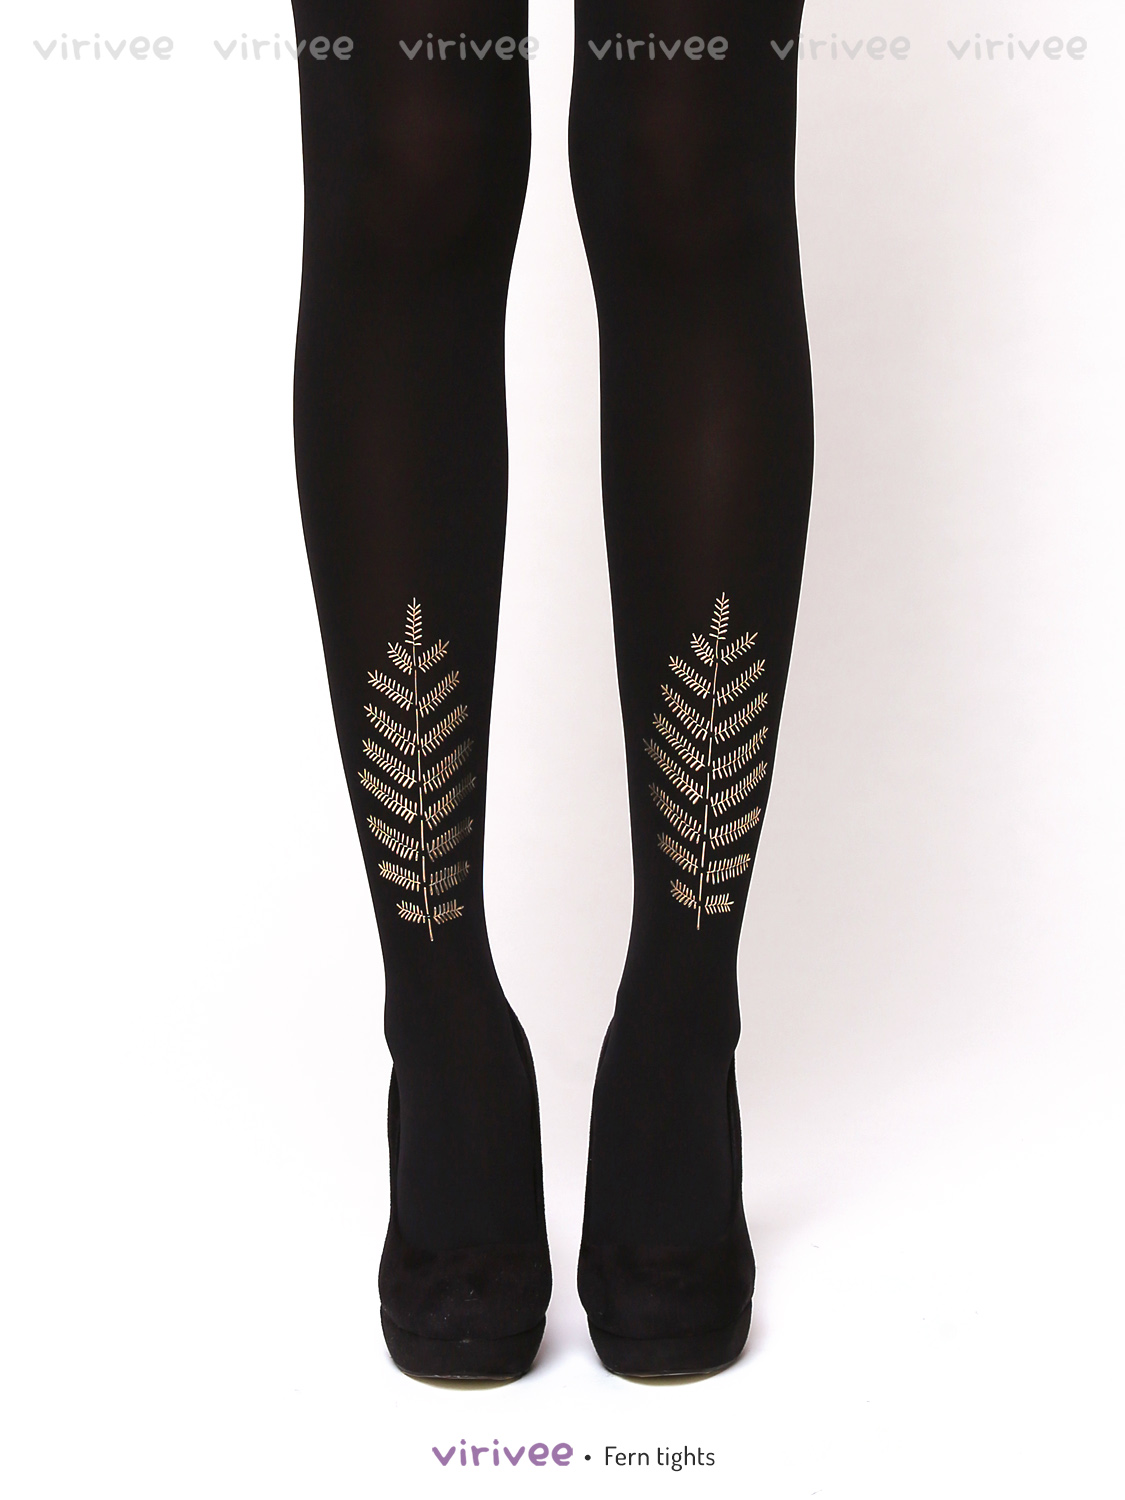 Golden or silver fern tights